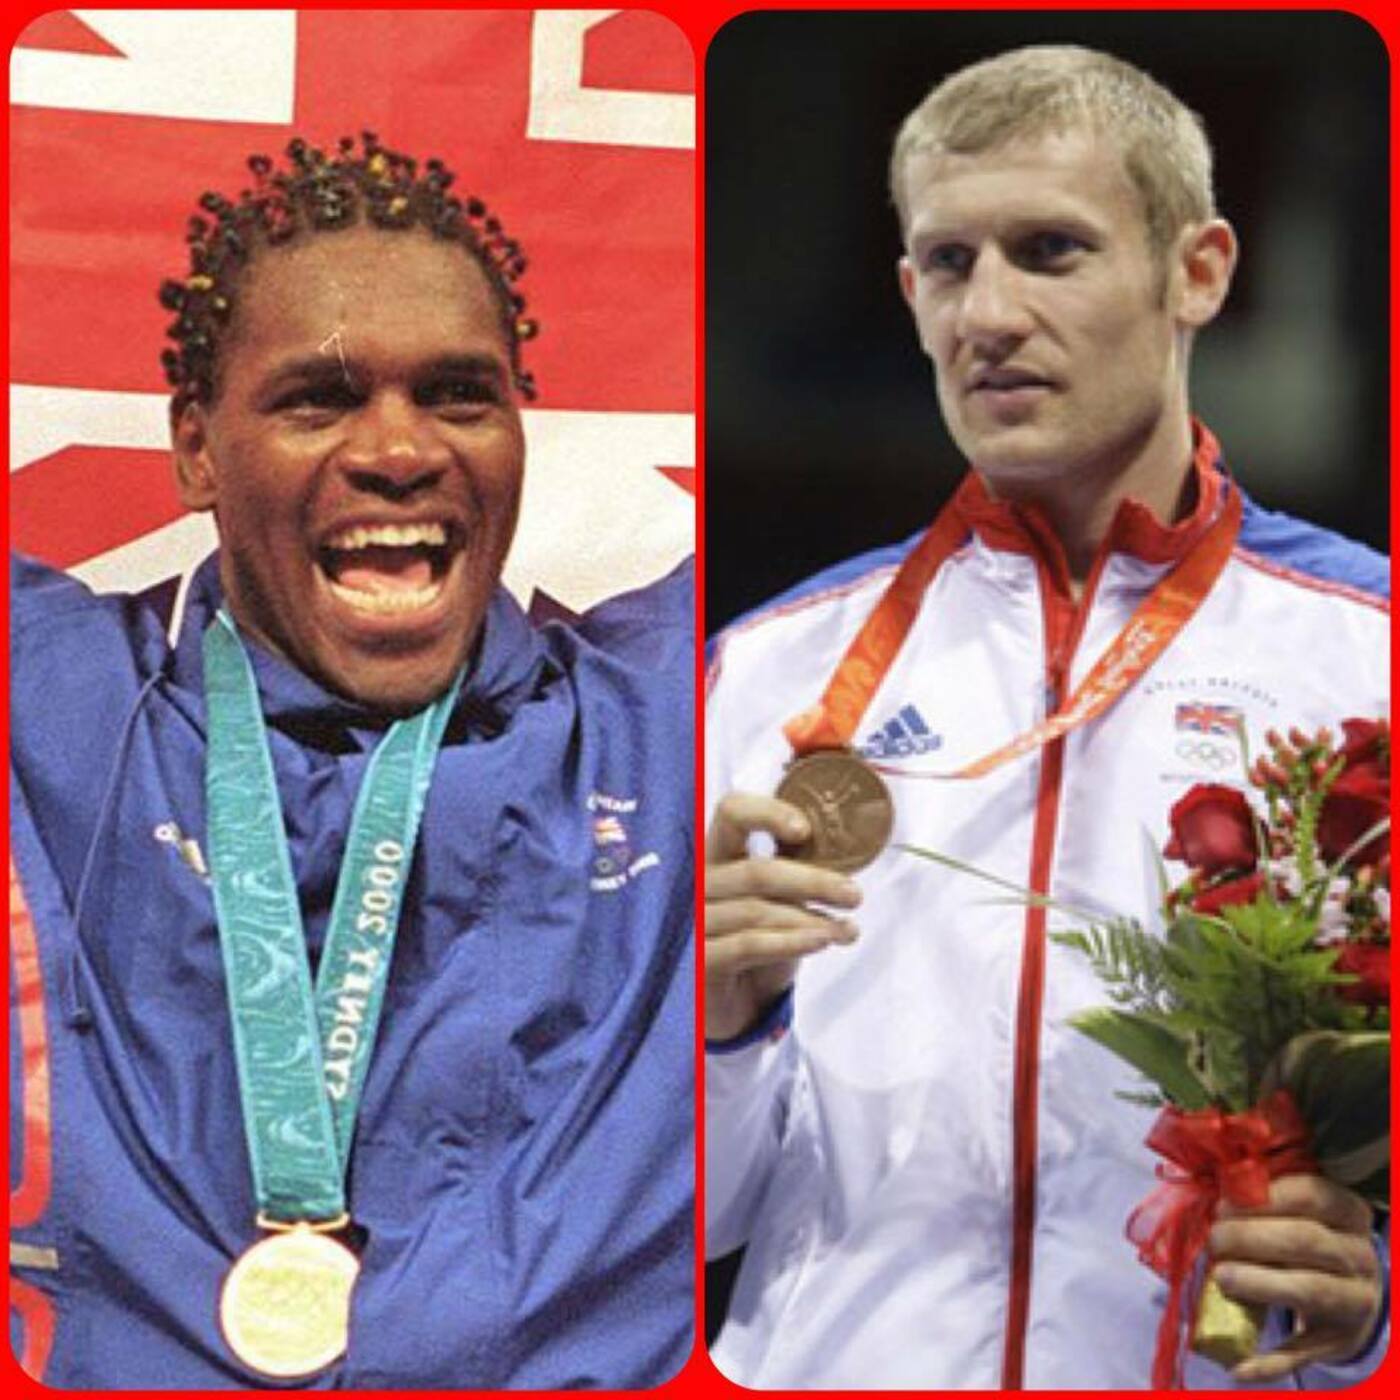 #6 Audley Harrison Olympic Champion